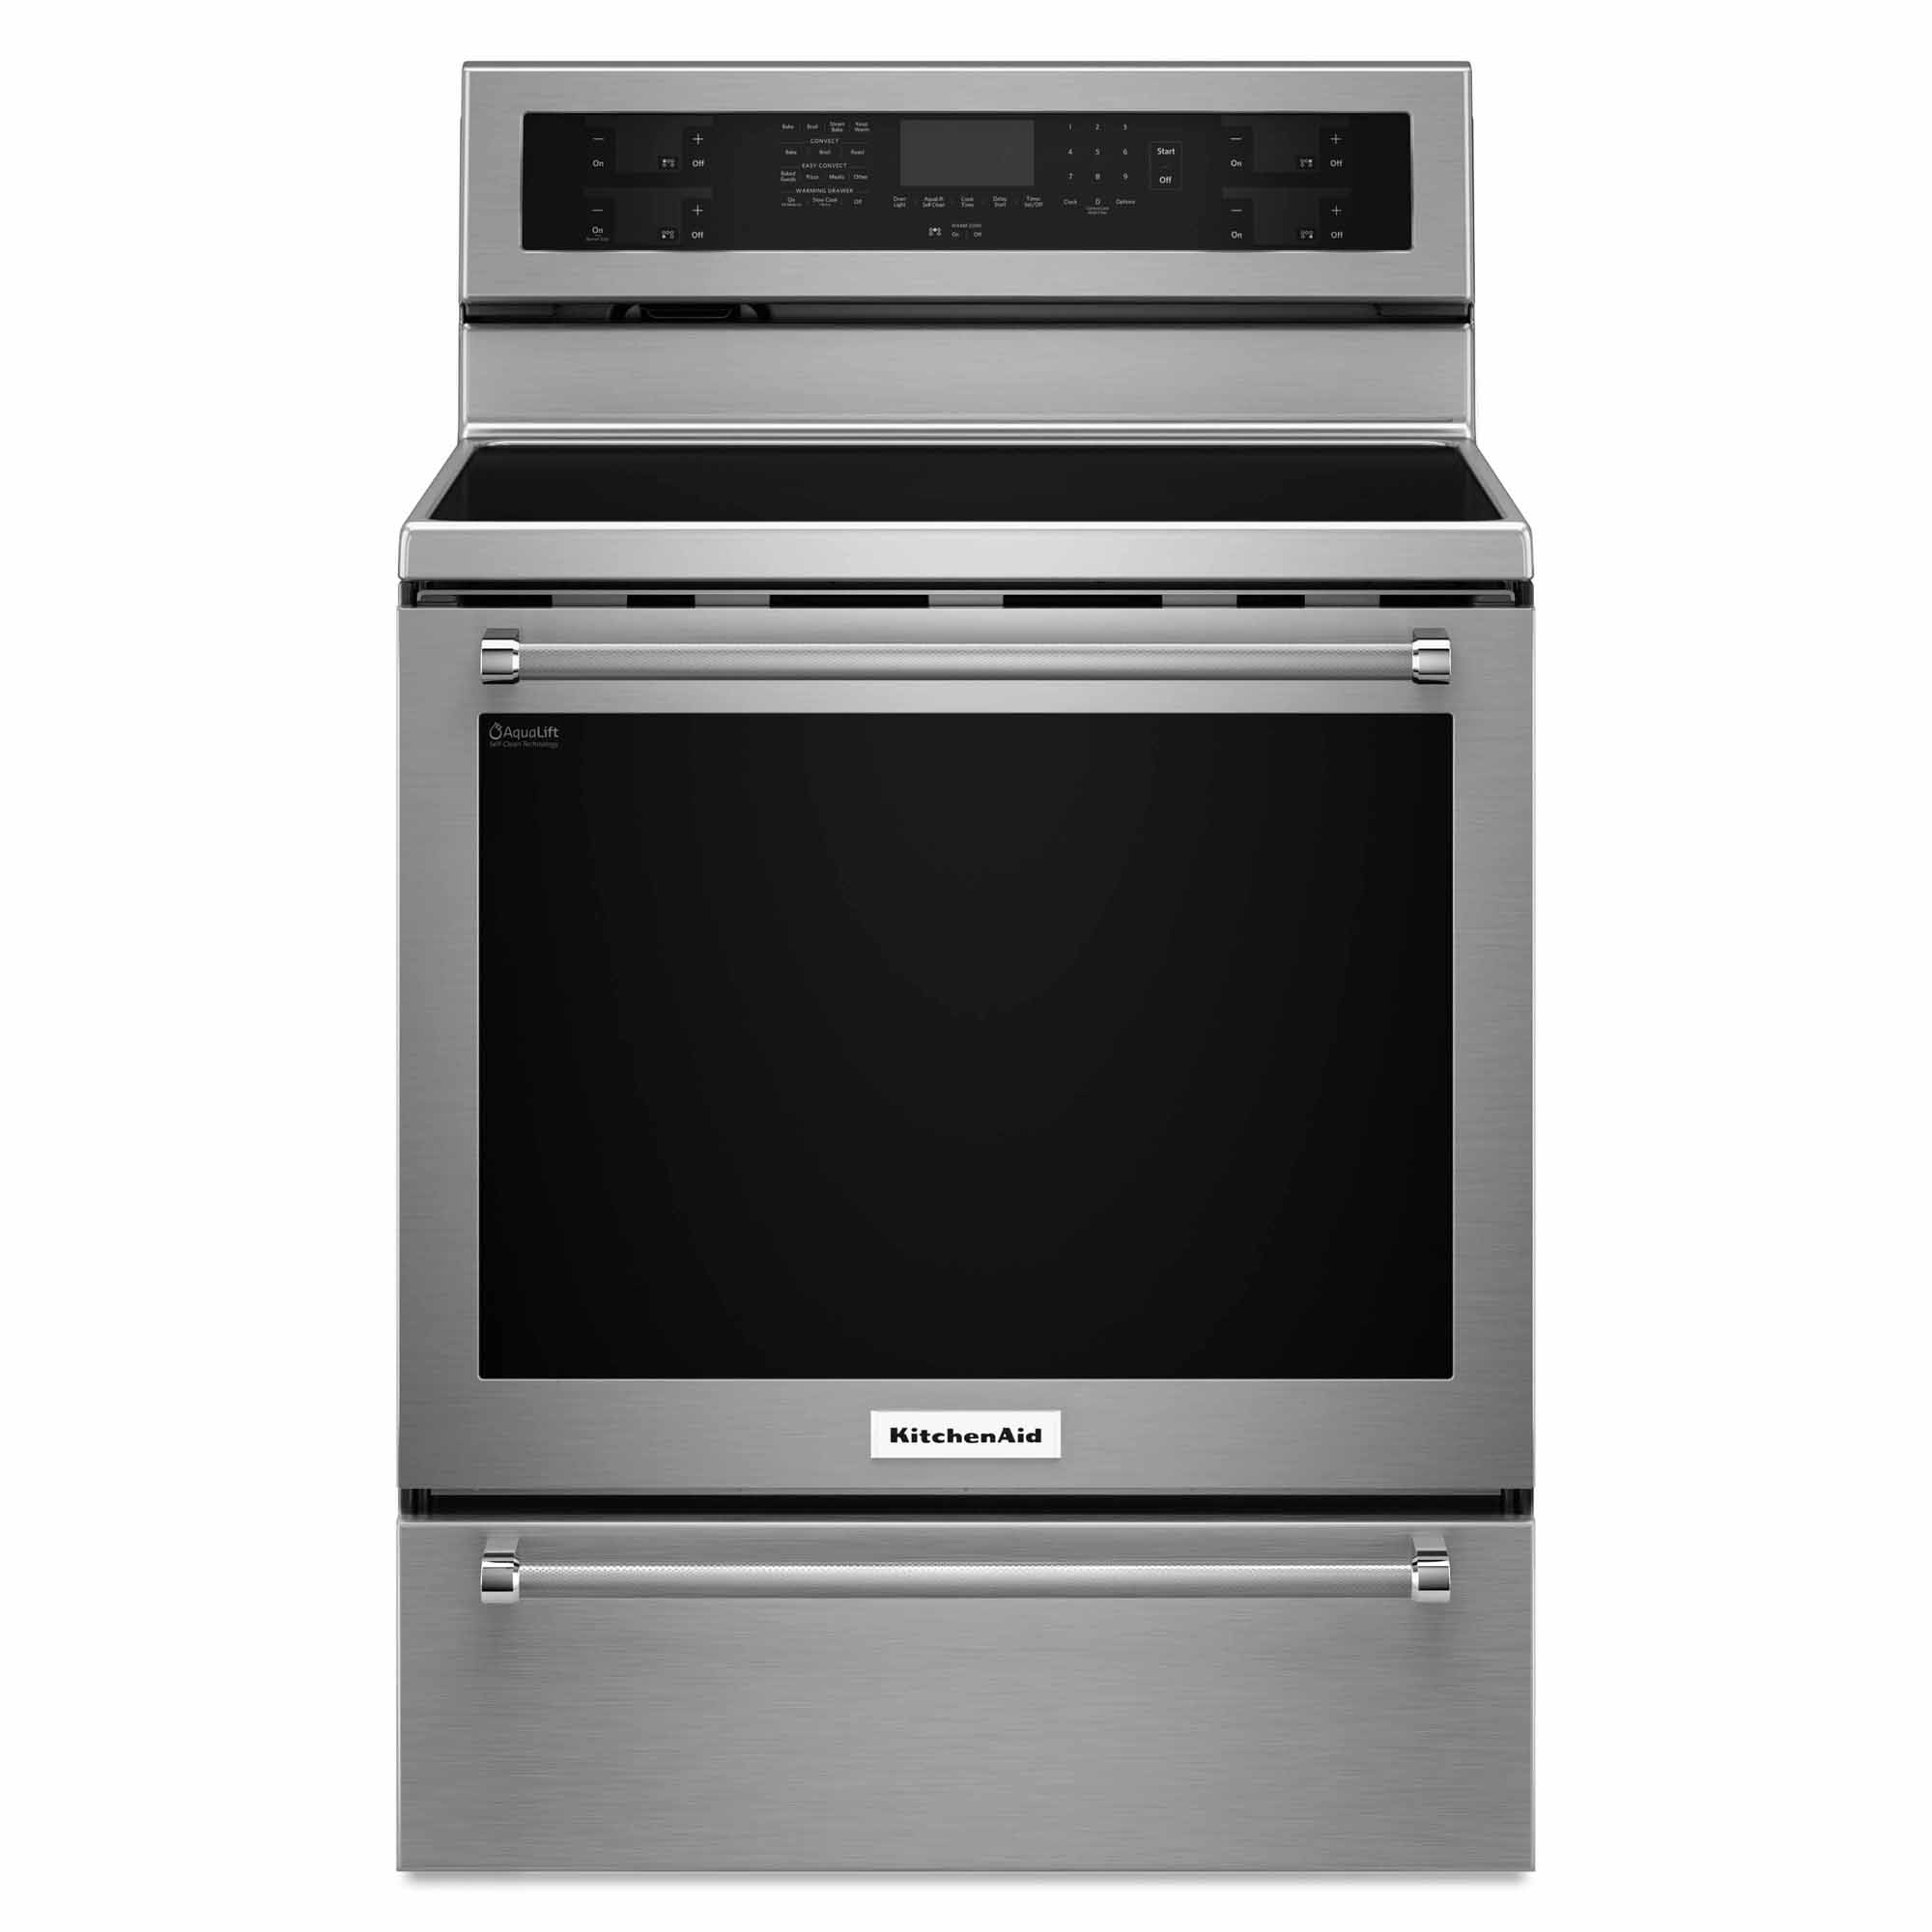 Samsung Vs Kitchenaid Kitchen Packages Ratings Reviews Prices